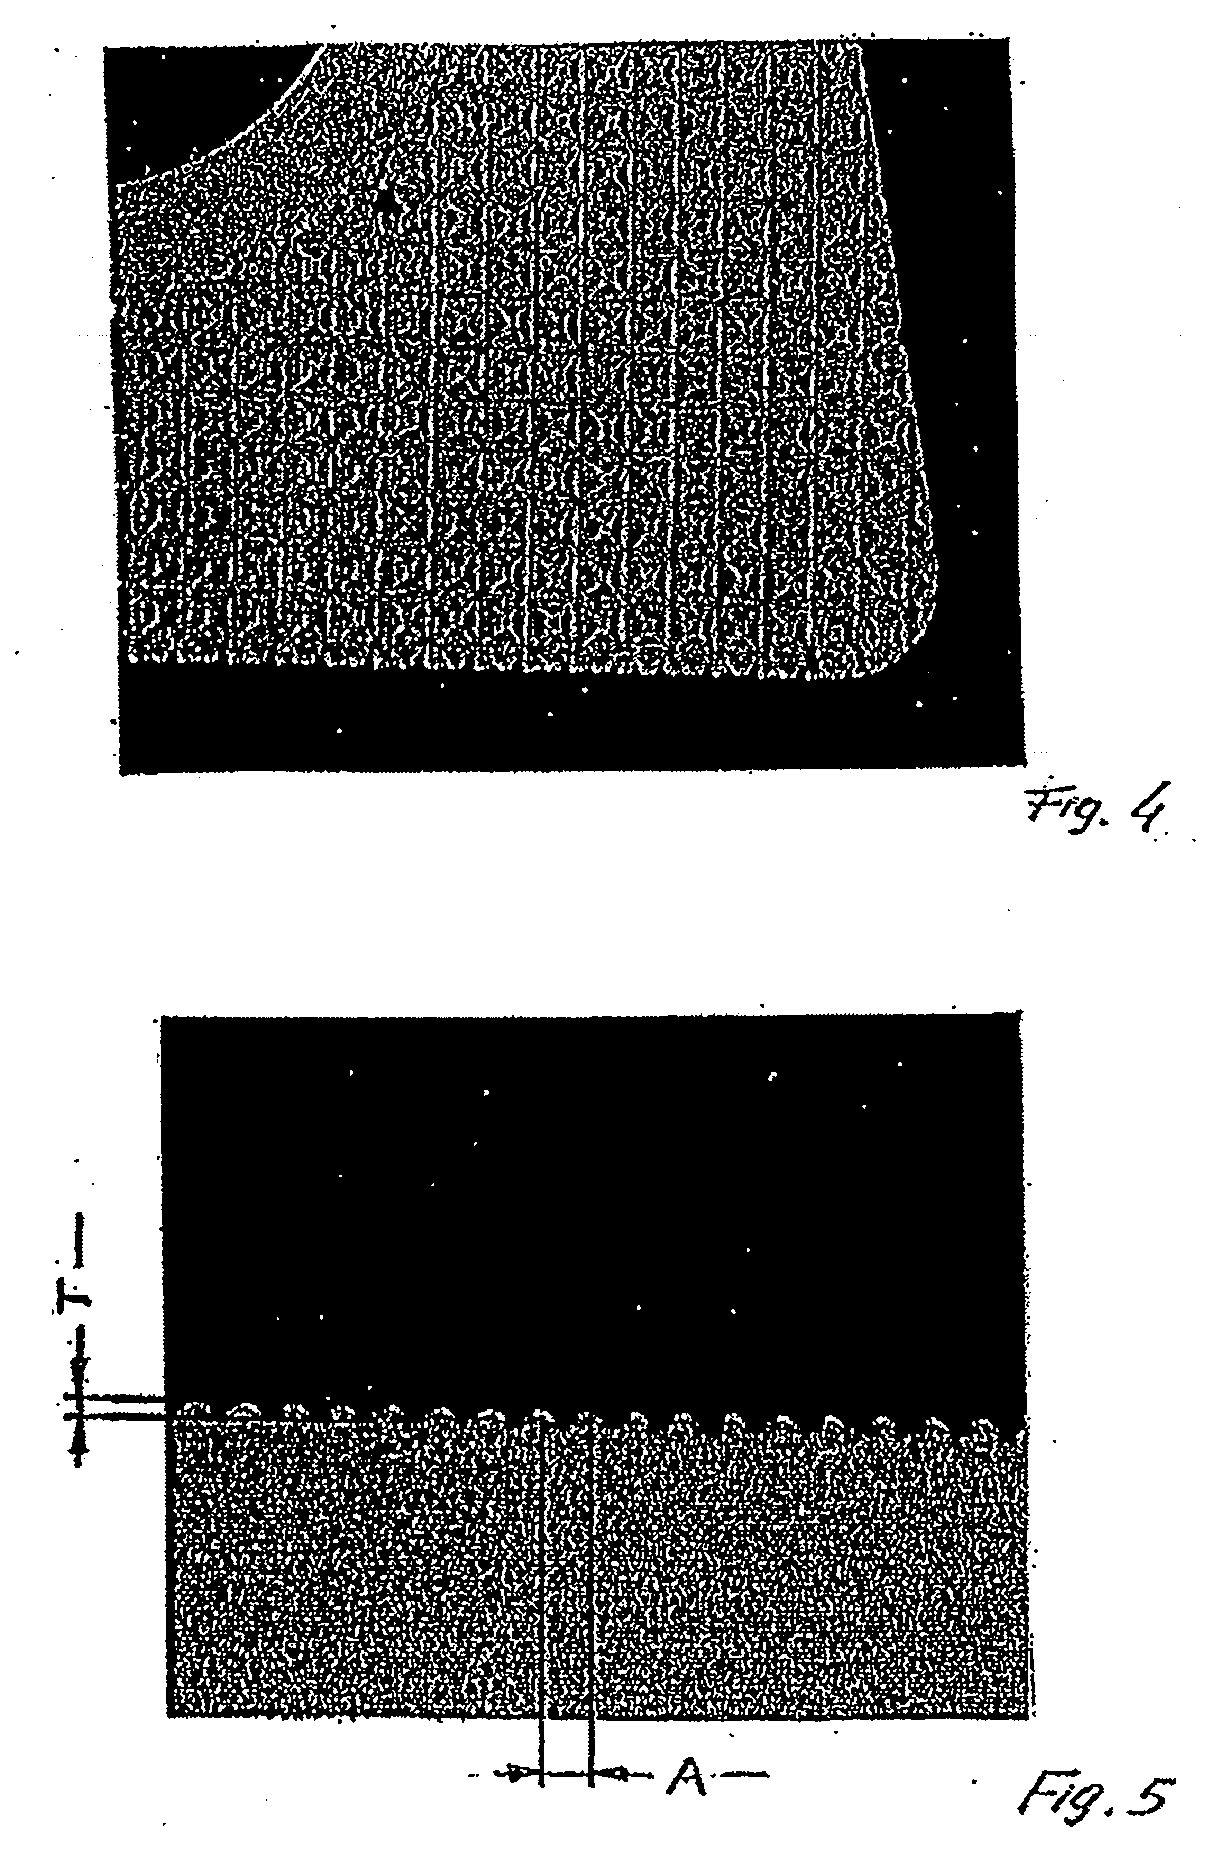 Cutting Insert Provided With Structured Surfaces